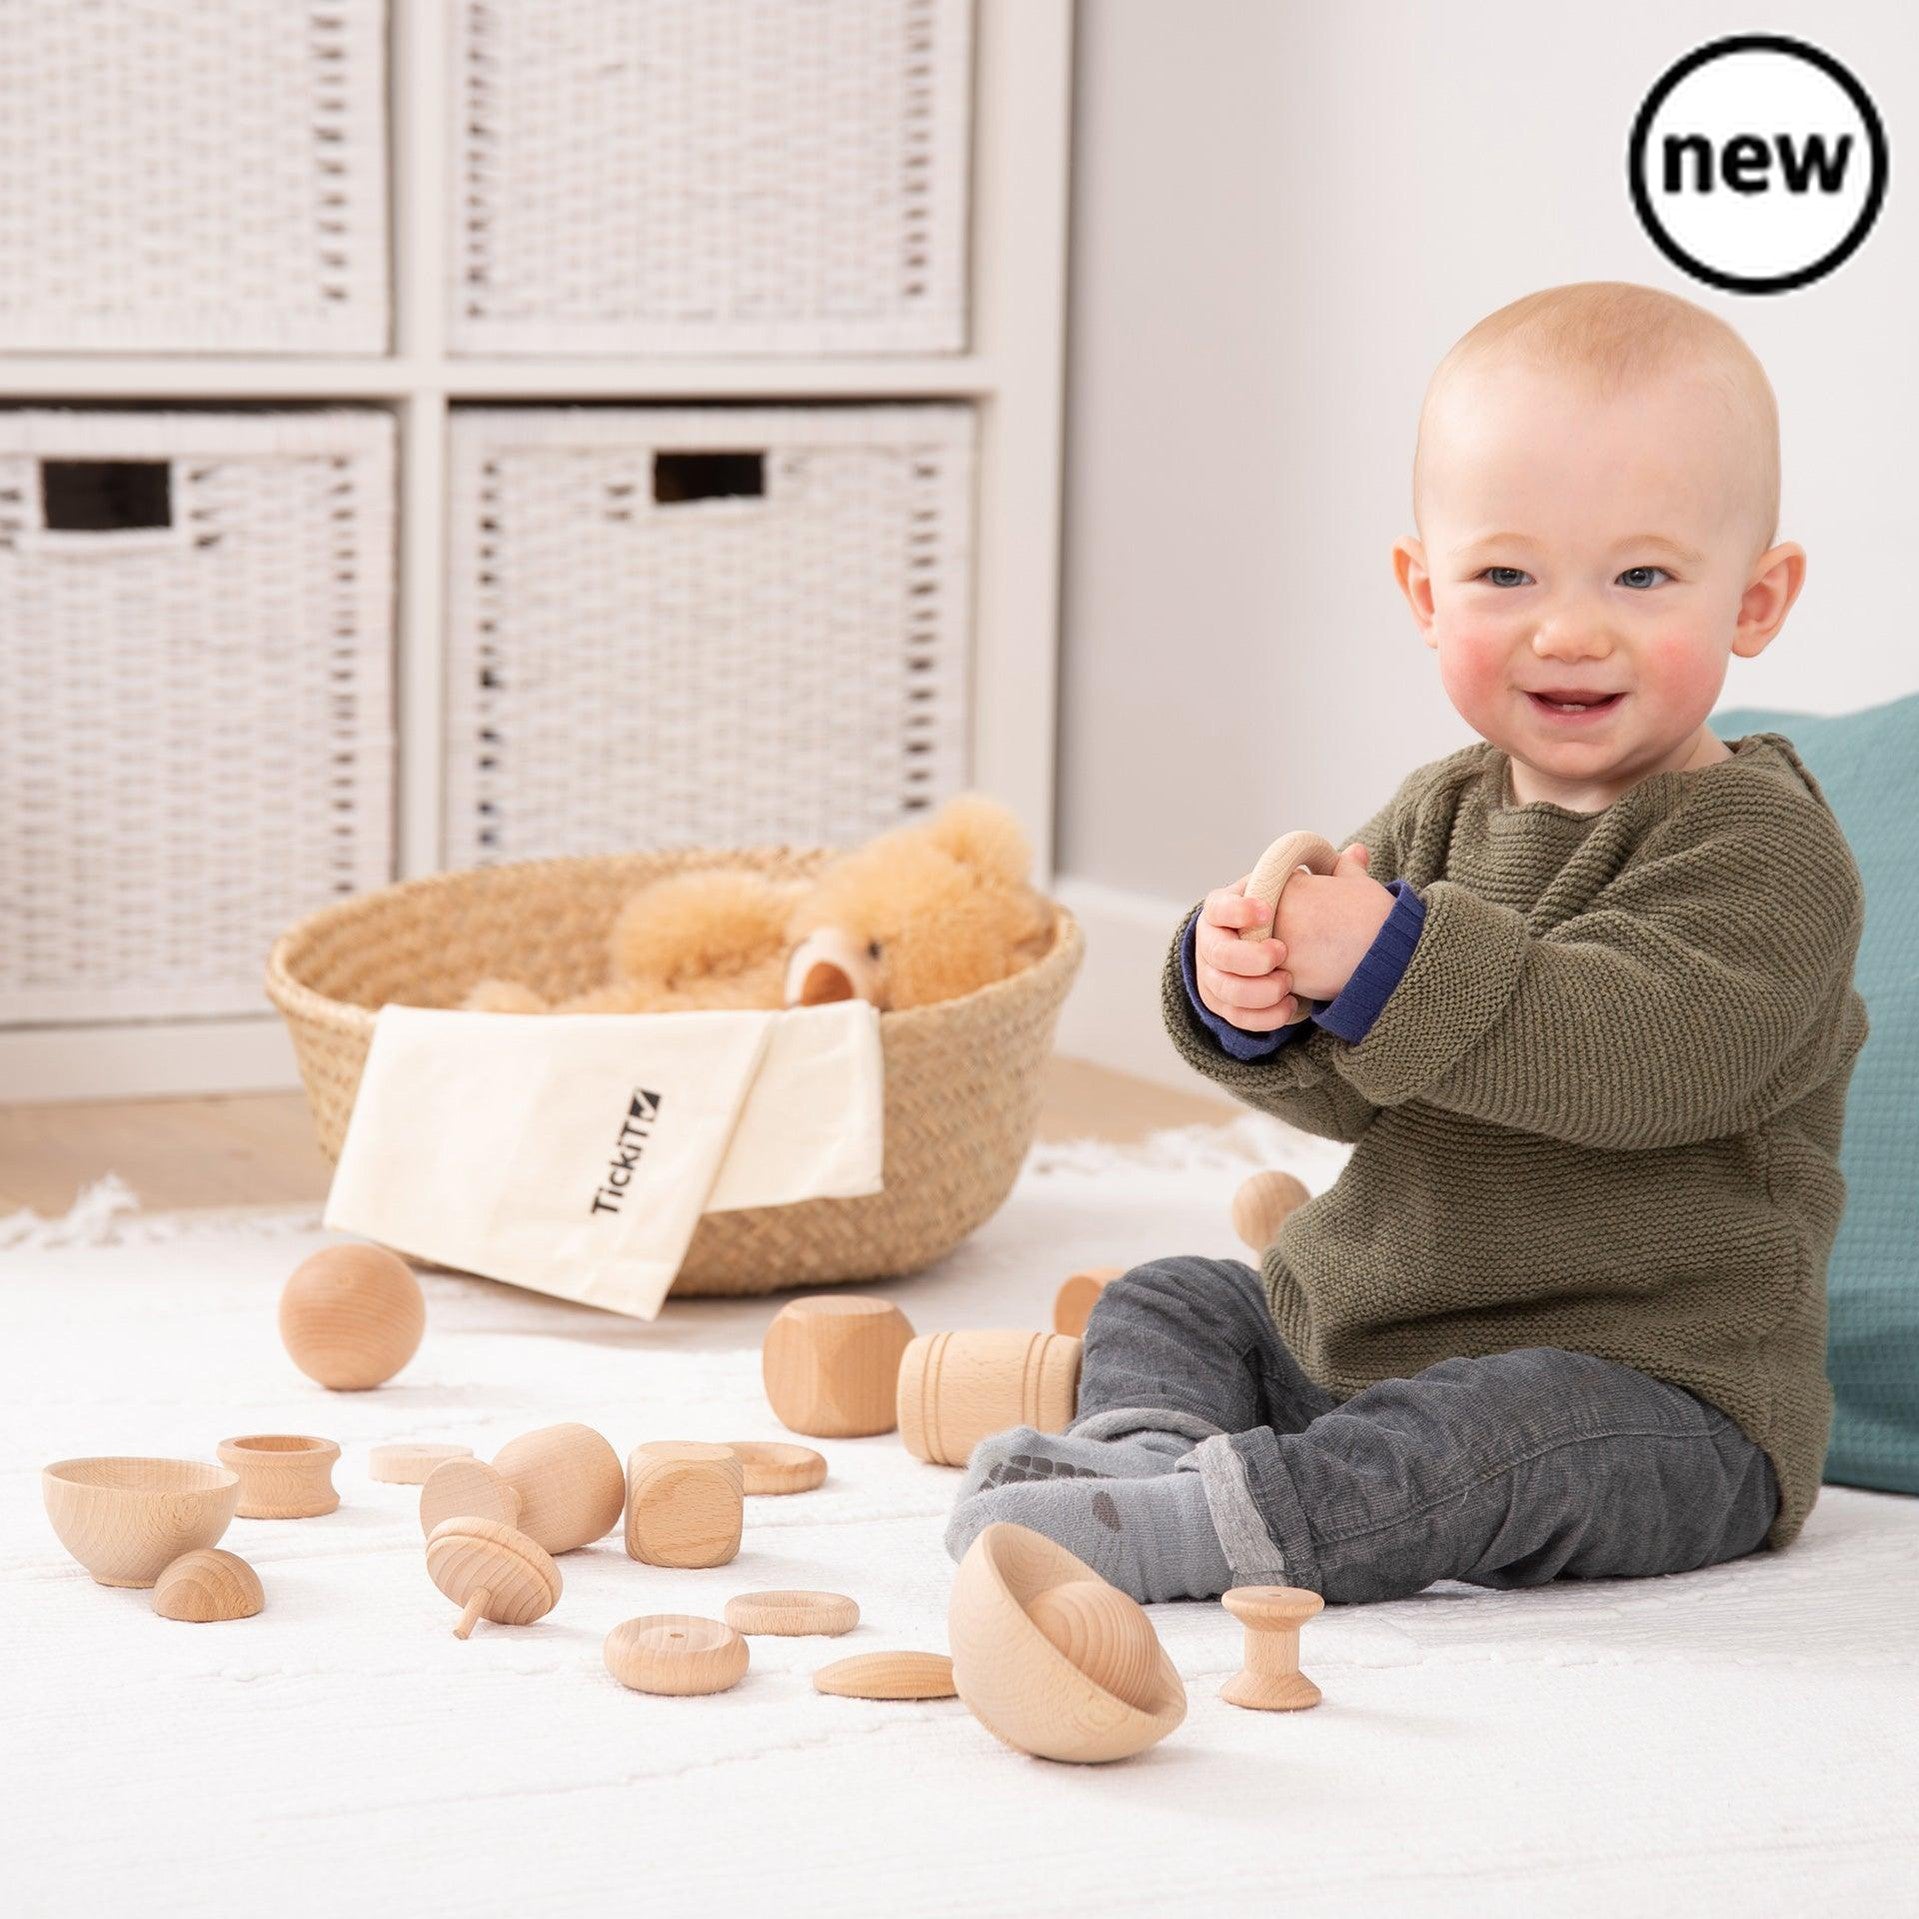 Heuristic Play Basic Set, Enable your child to discover the wonders of learning through play with our TickiT® Heuristic Play Basic Set. The Heuristic Play Basic Set contains a variety of interesting wooden objects that are not typical of the sort of toys they will be used to. These simple and curious items will spark your child's imagination and encourage them to explore ways to incorporate them into imaginative play and learn about the world around them. Quite simply, the Heuristic Play Basic Set resources